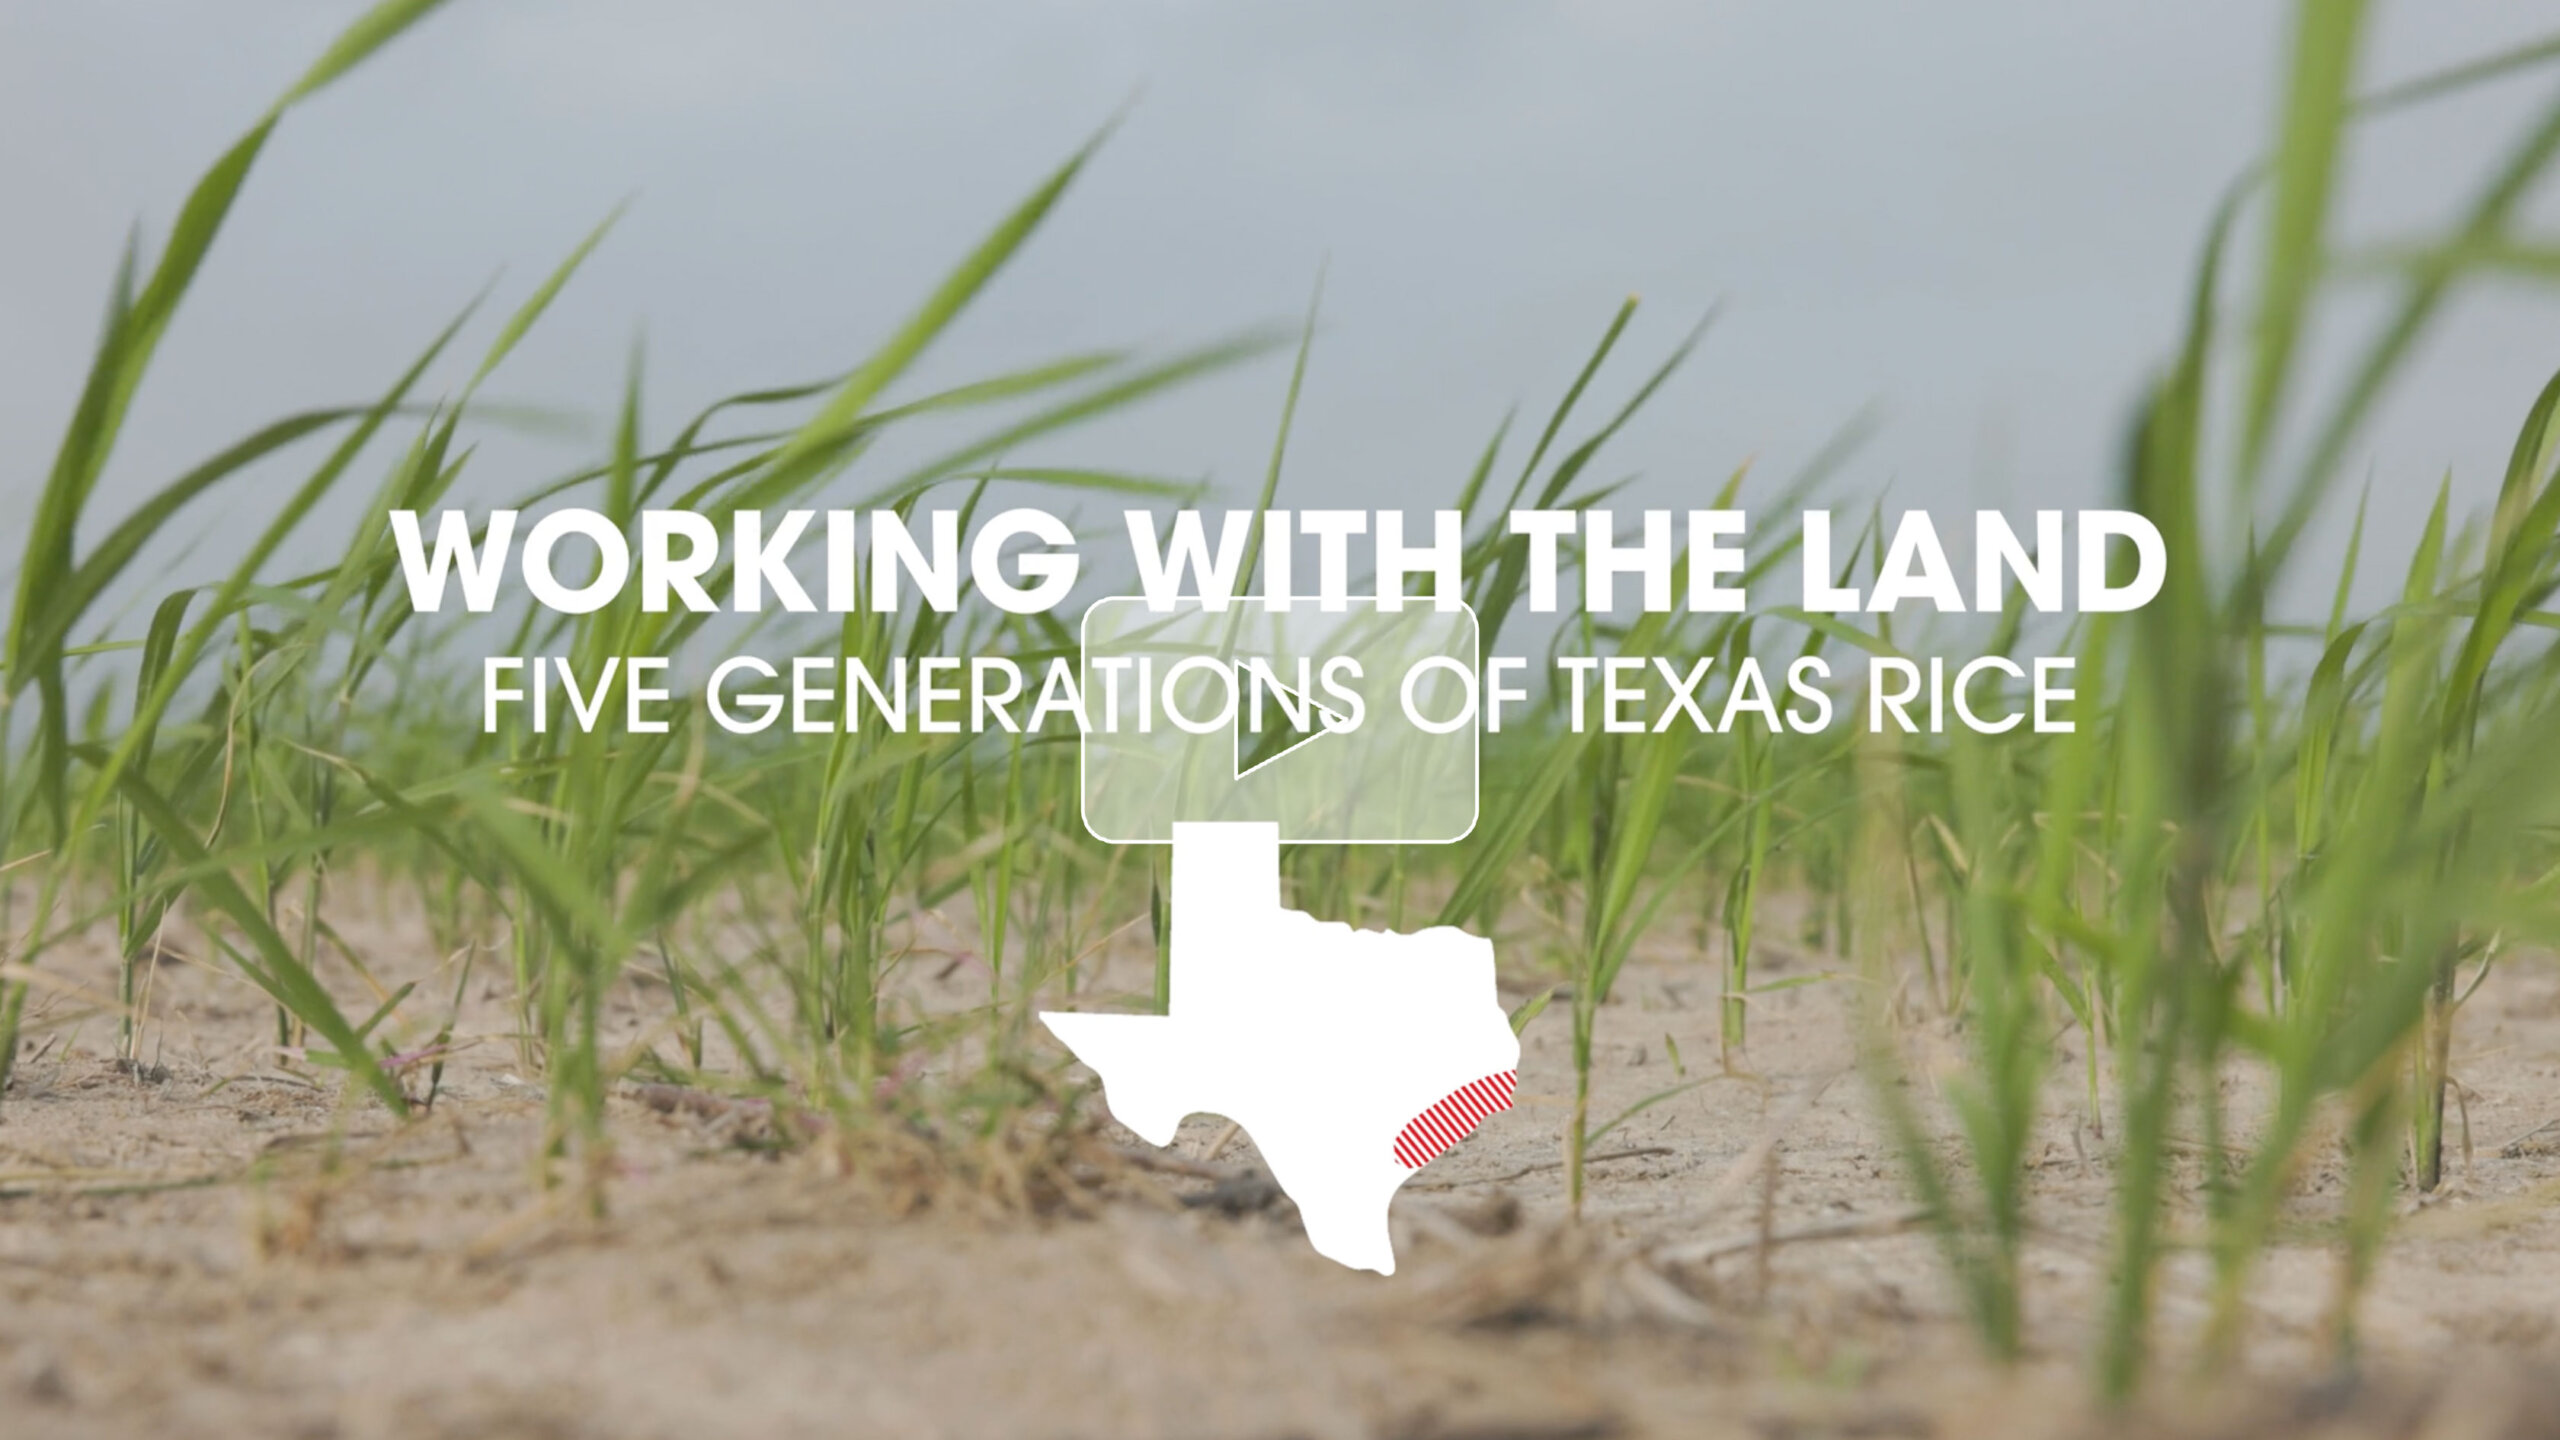 Screenshot previewing a video documenting Texas rice production